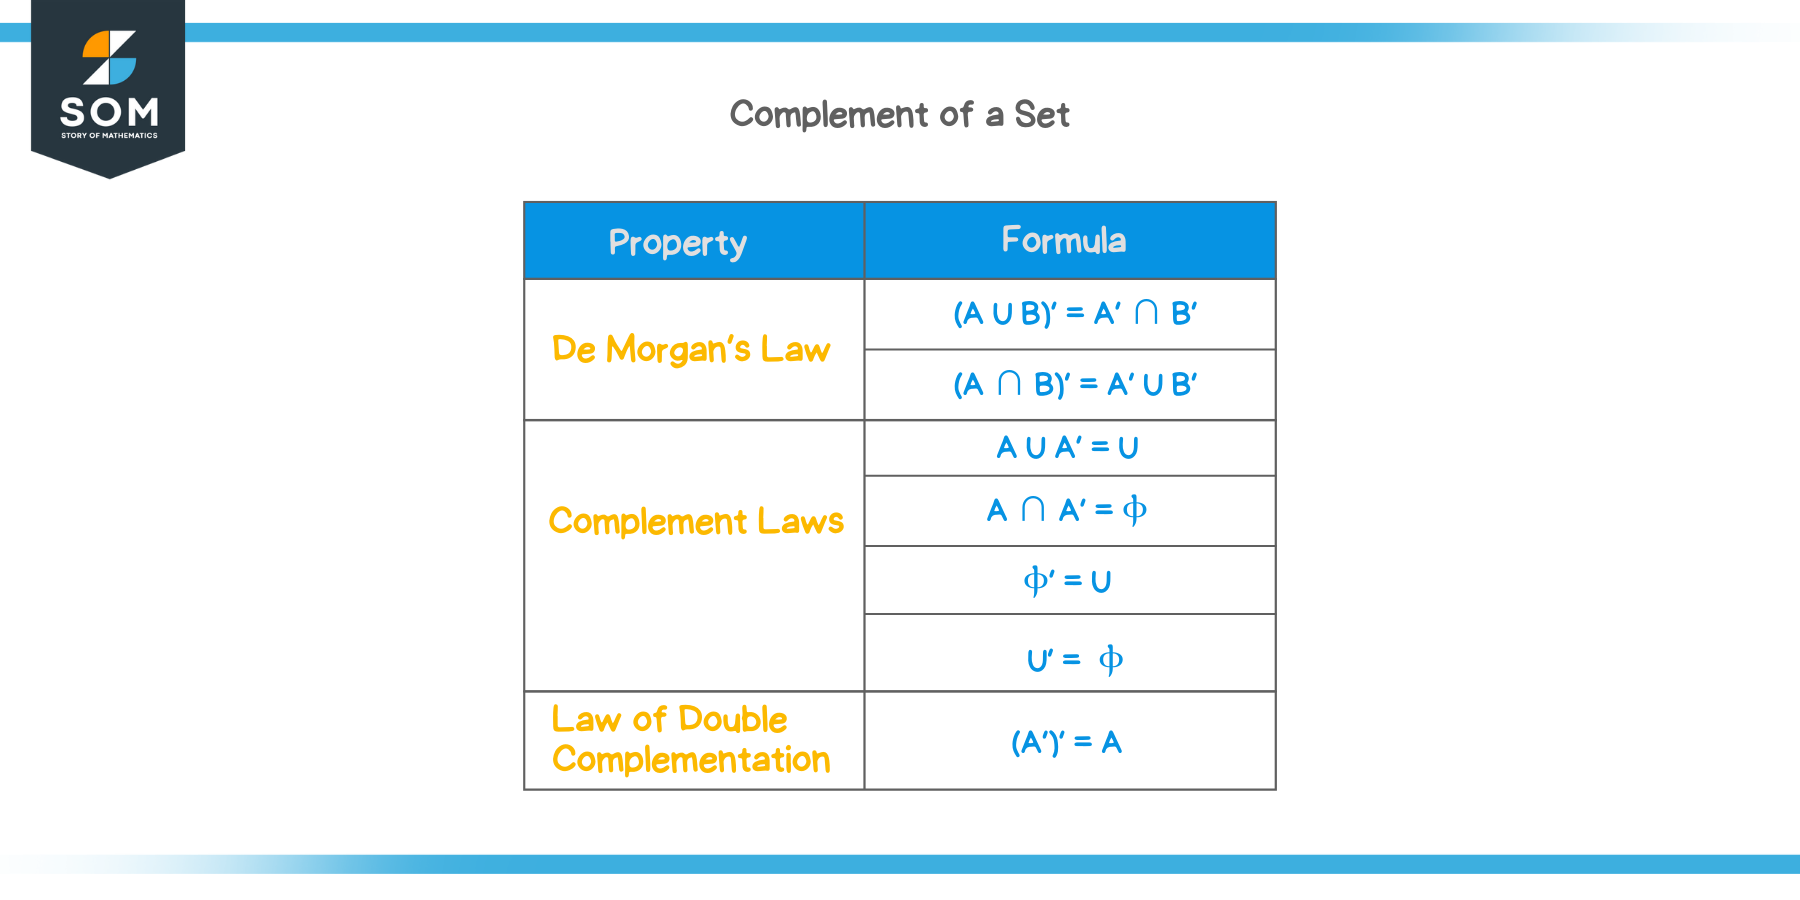 Properties of Complement of a Set